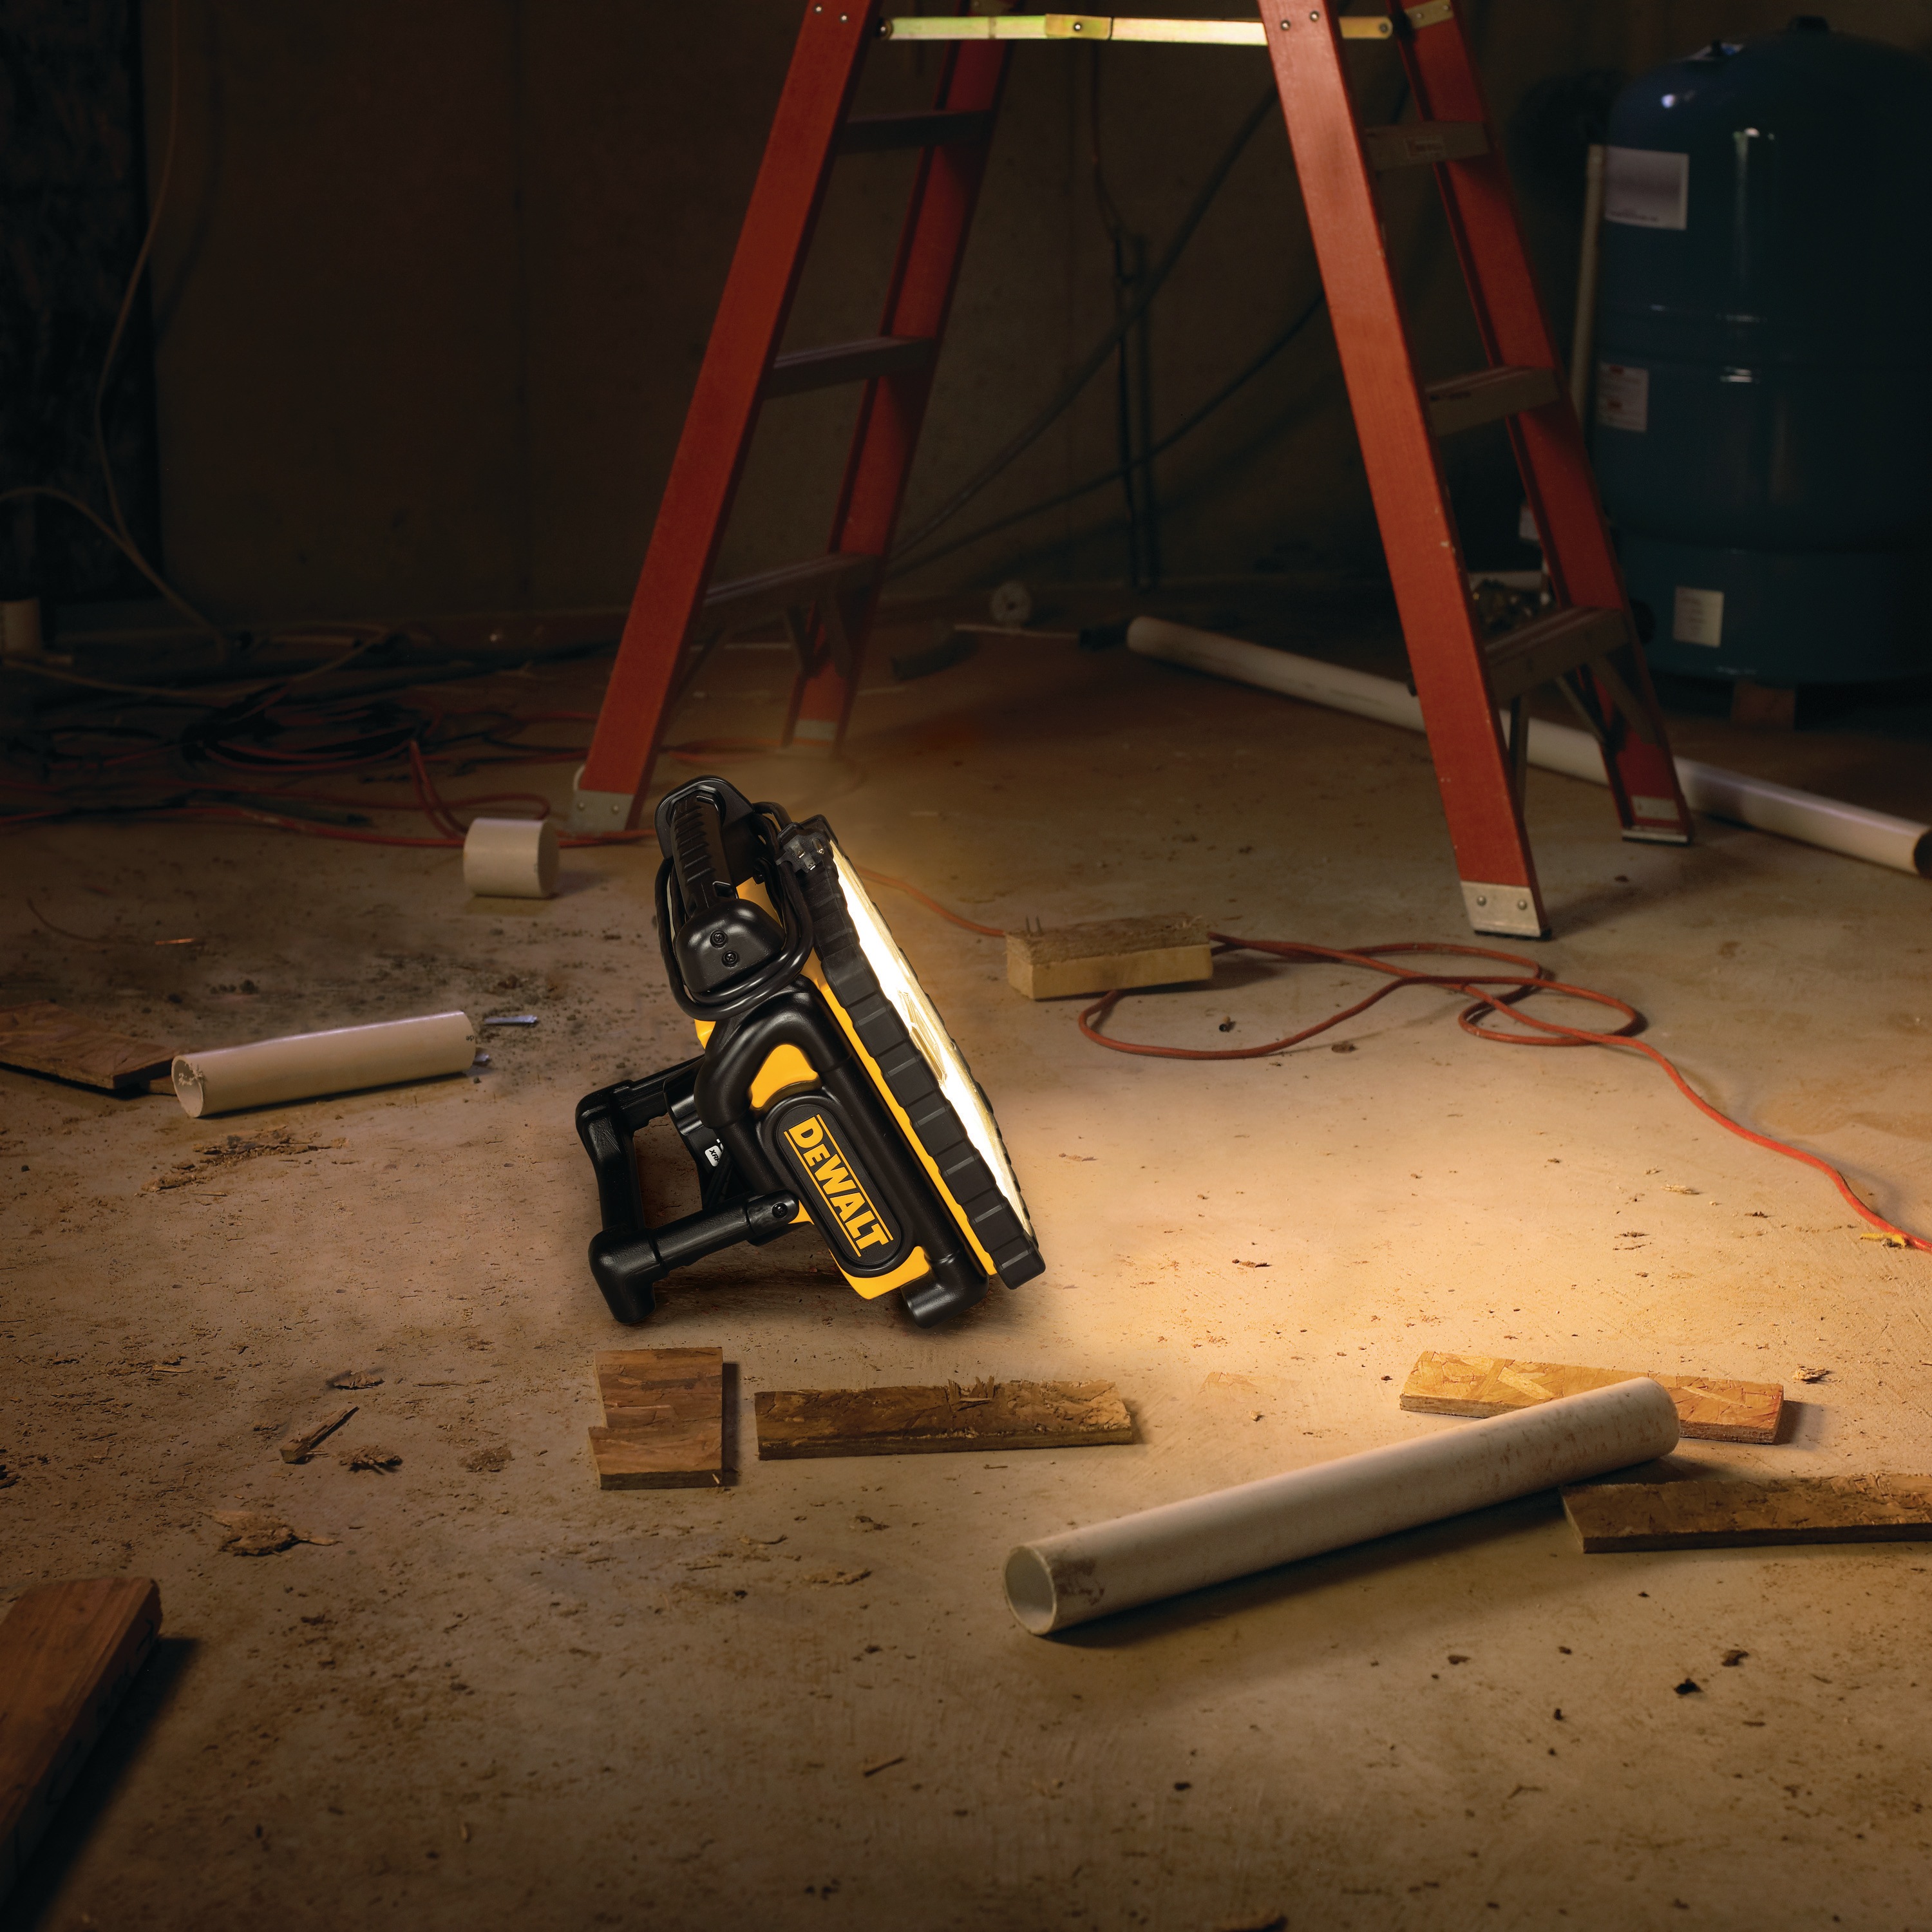 Cordless Area Light being used at a construction site